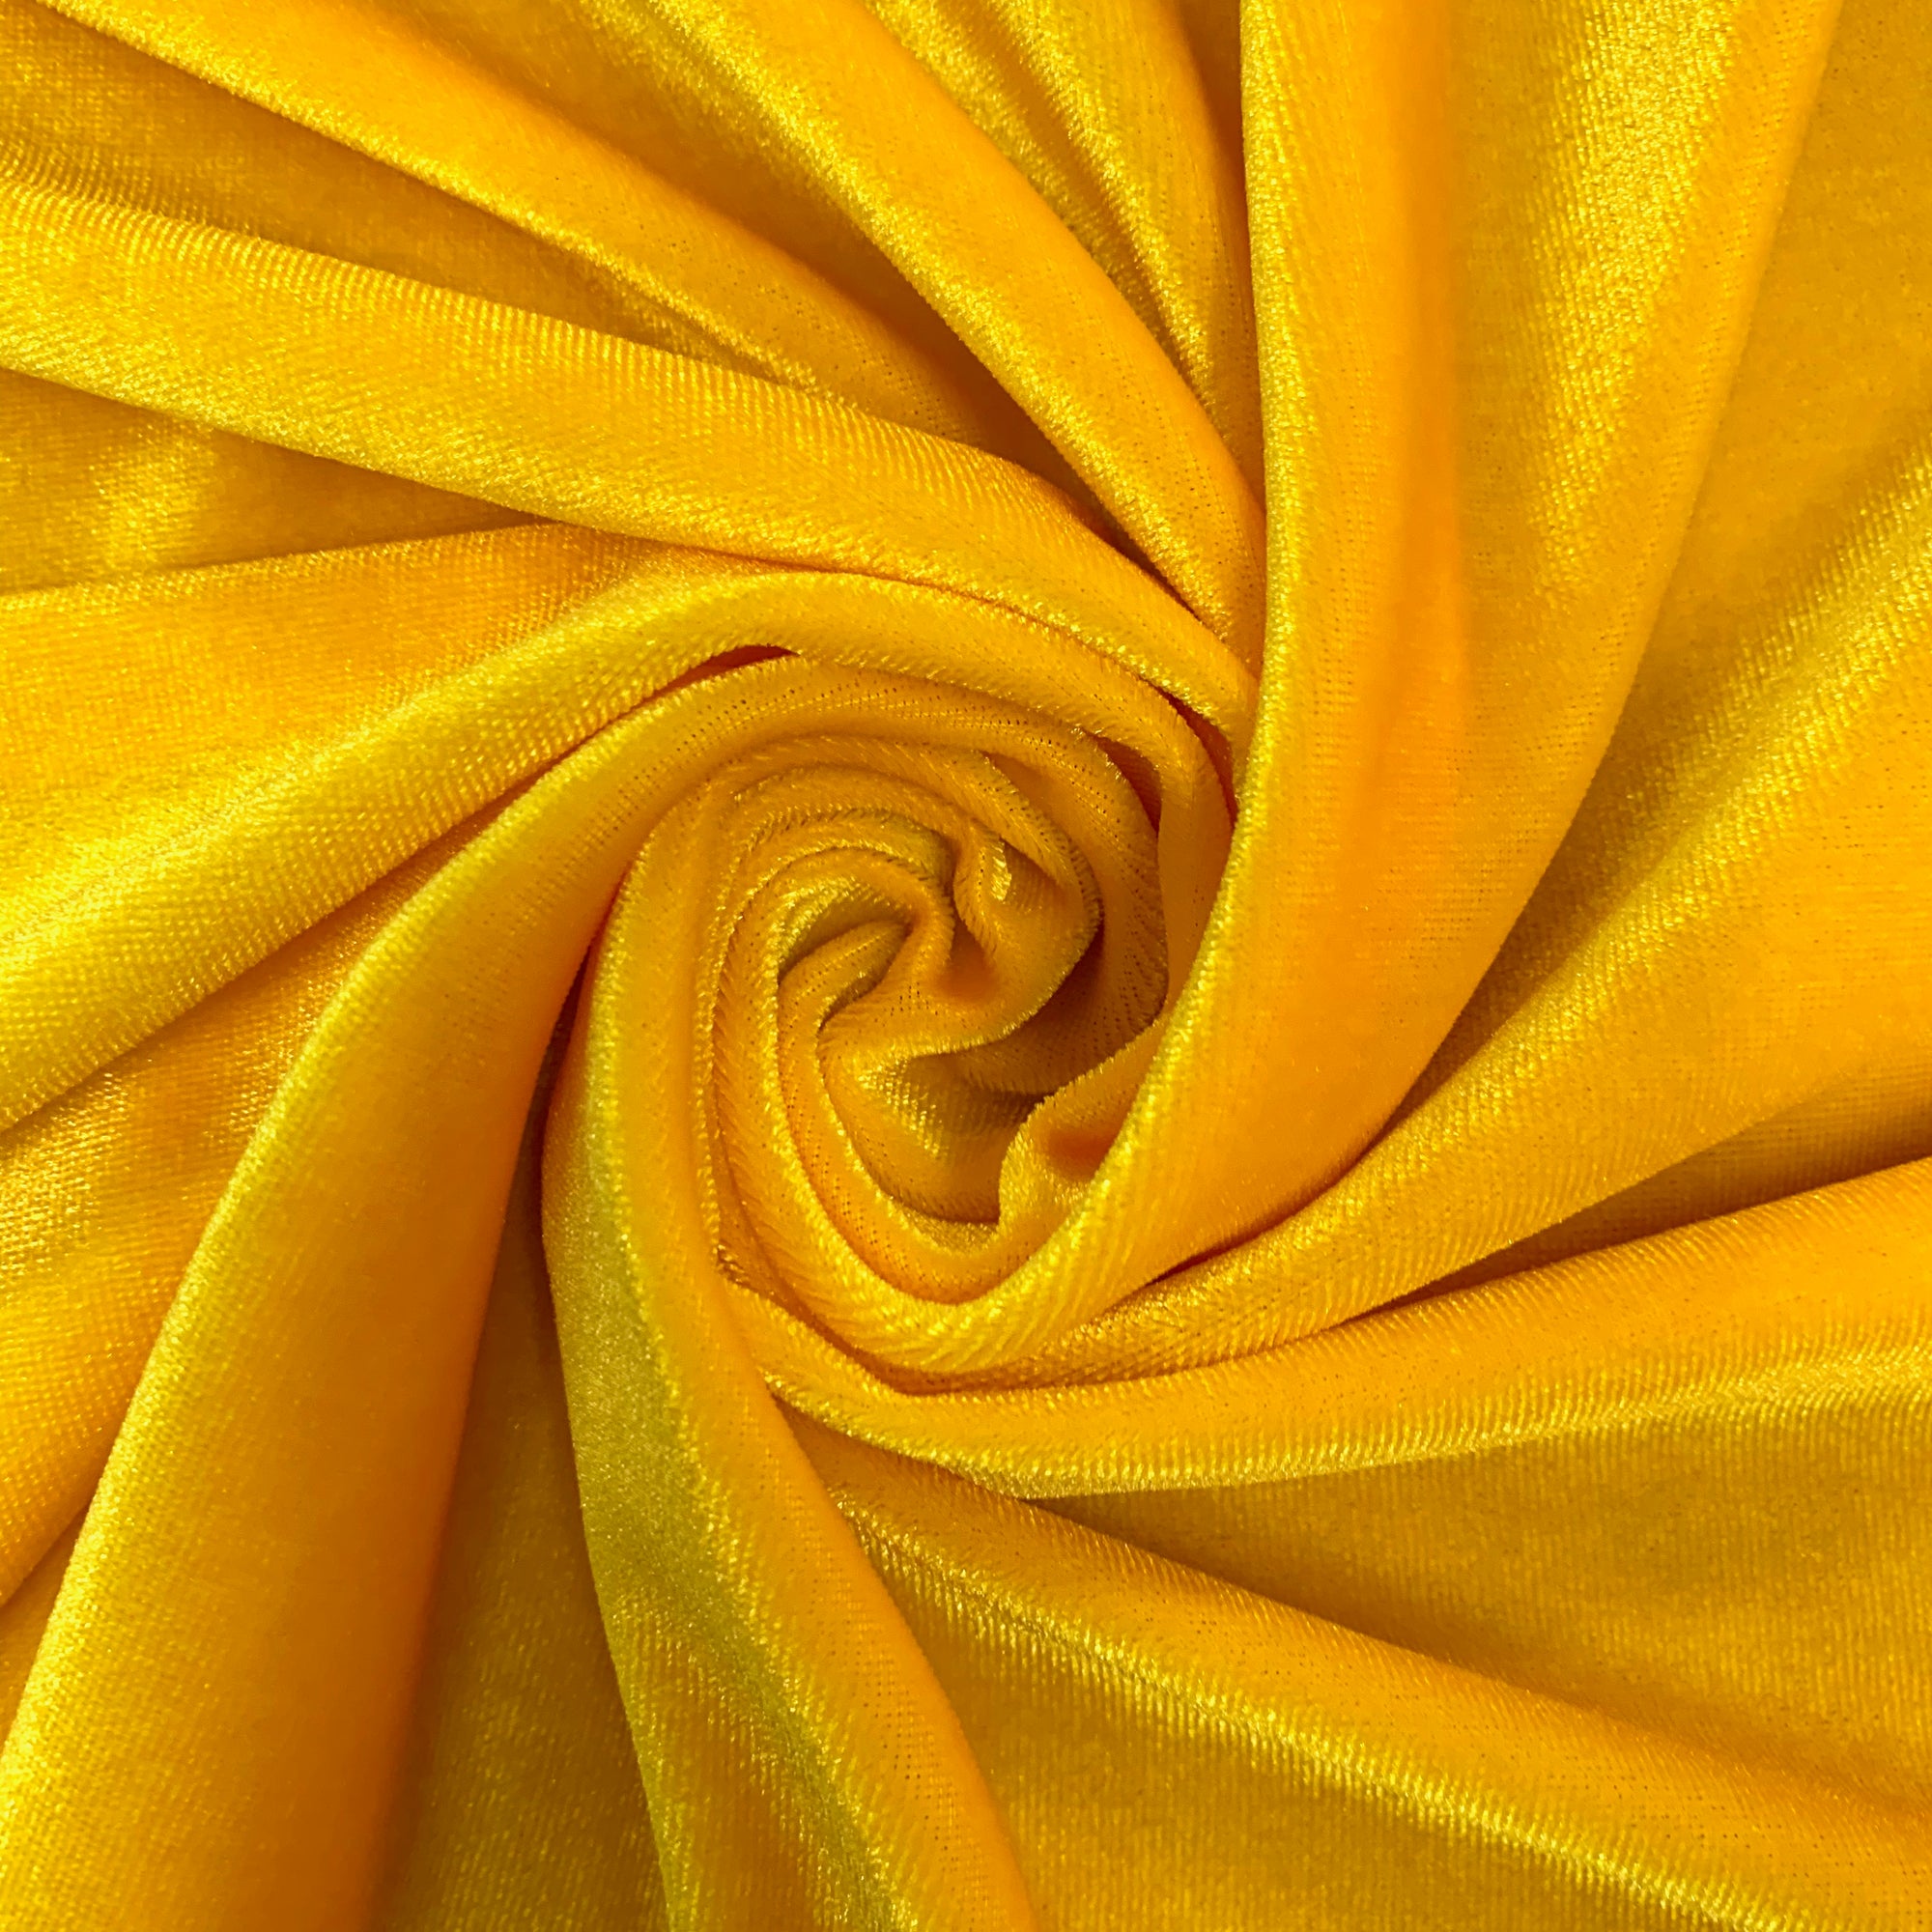 Princess MANGO Polyester Stretch Velvet Fabric for Bows, Top Knots, Head Wraps, Scrunchies, Clothes, Costumes, Crafts